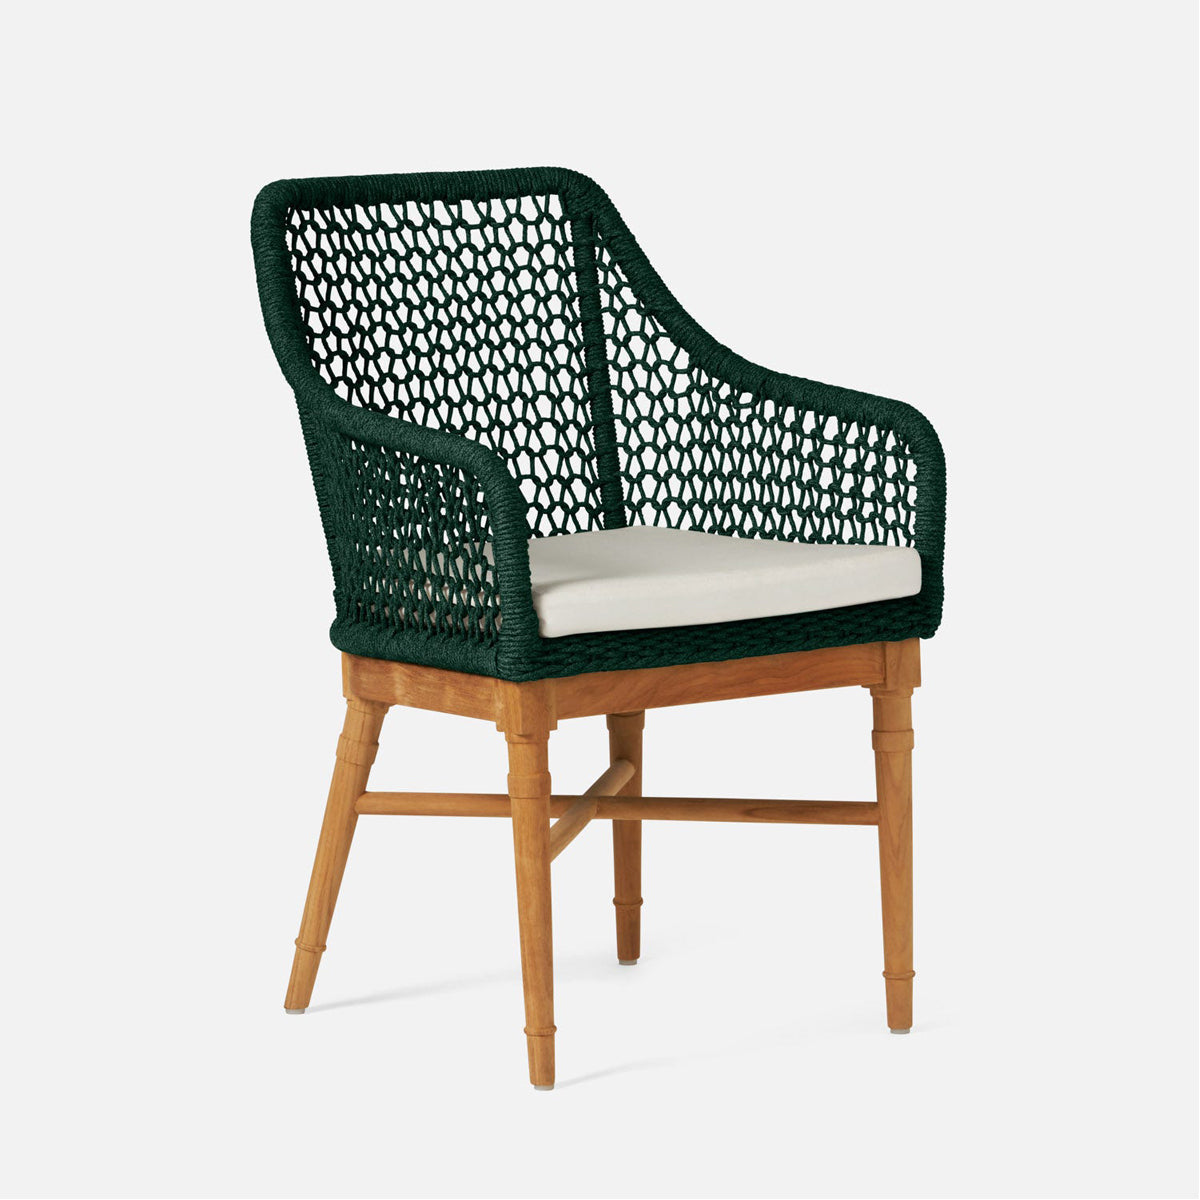 Made Goods Chadwick Woven Rope Outdoor Arm Chair in Danube Fabric